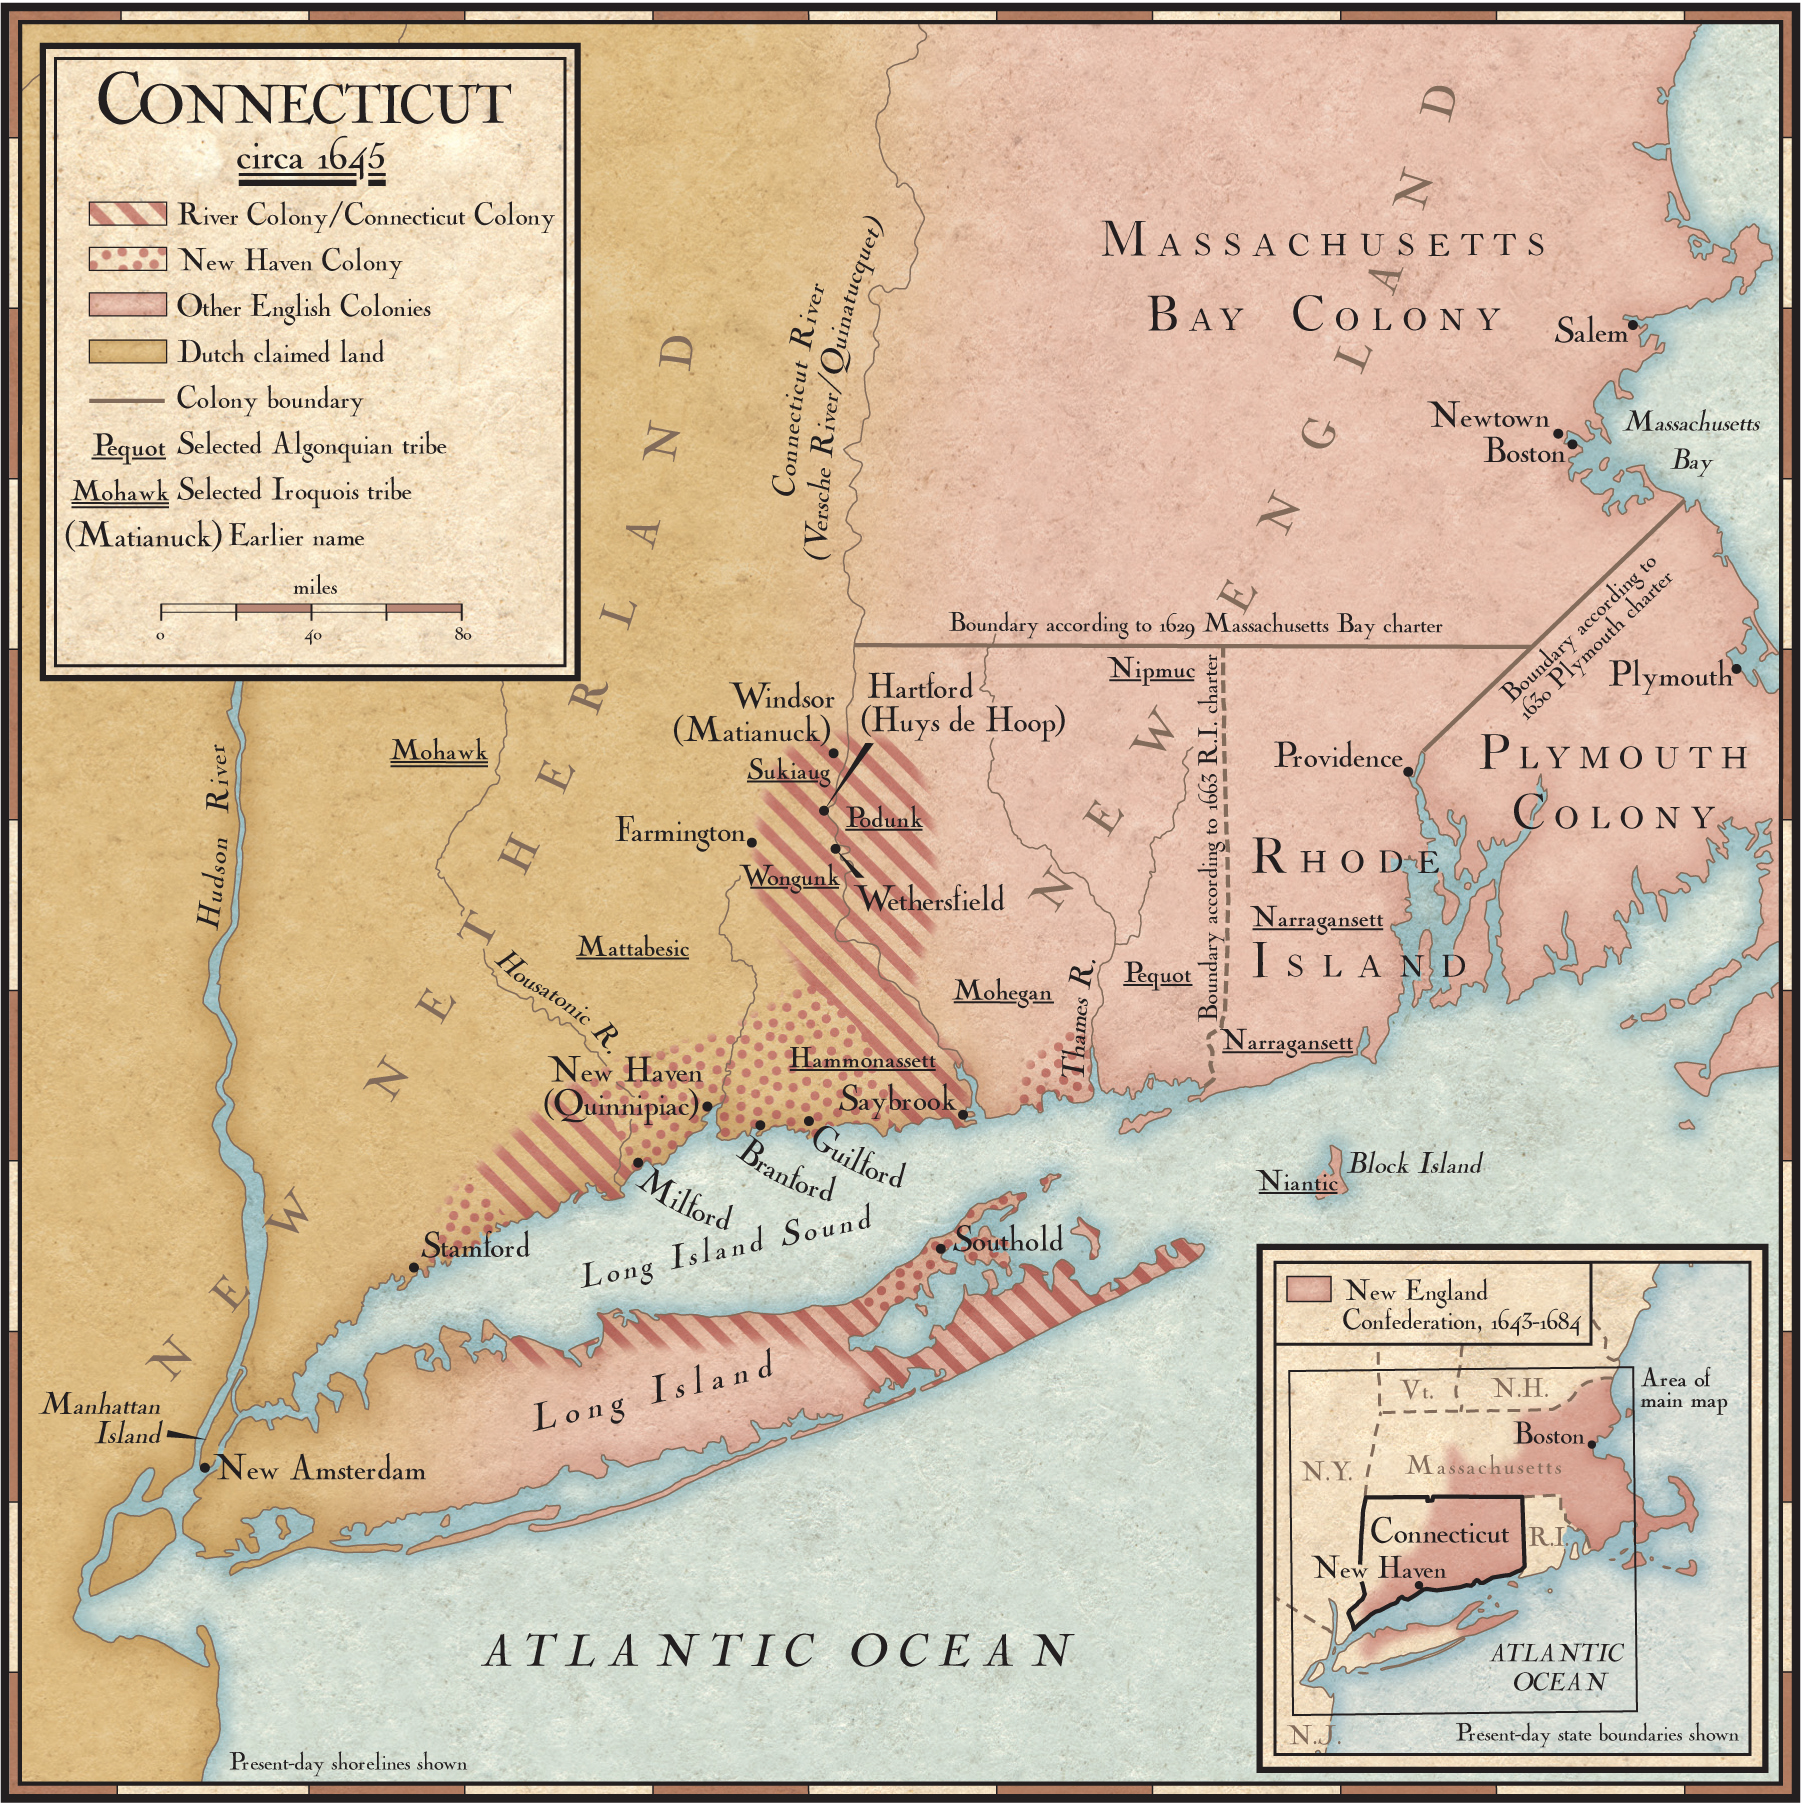 New England, History, States, Map, & Facts